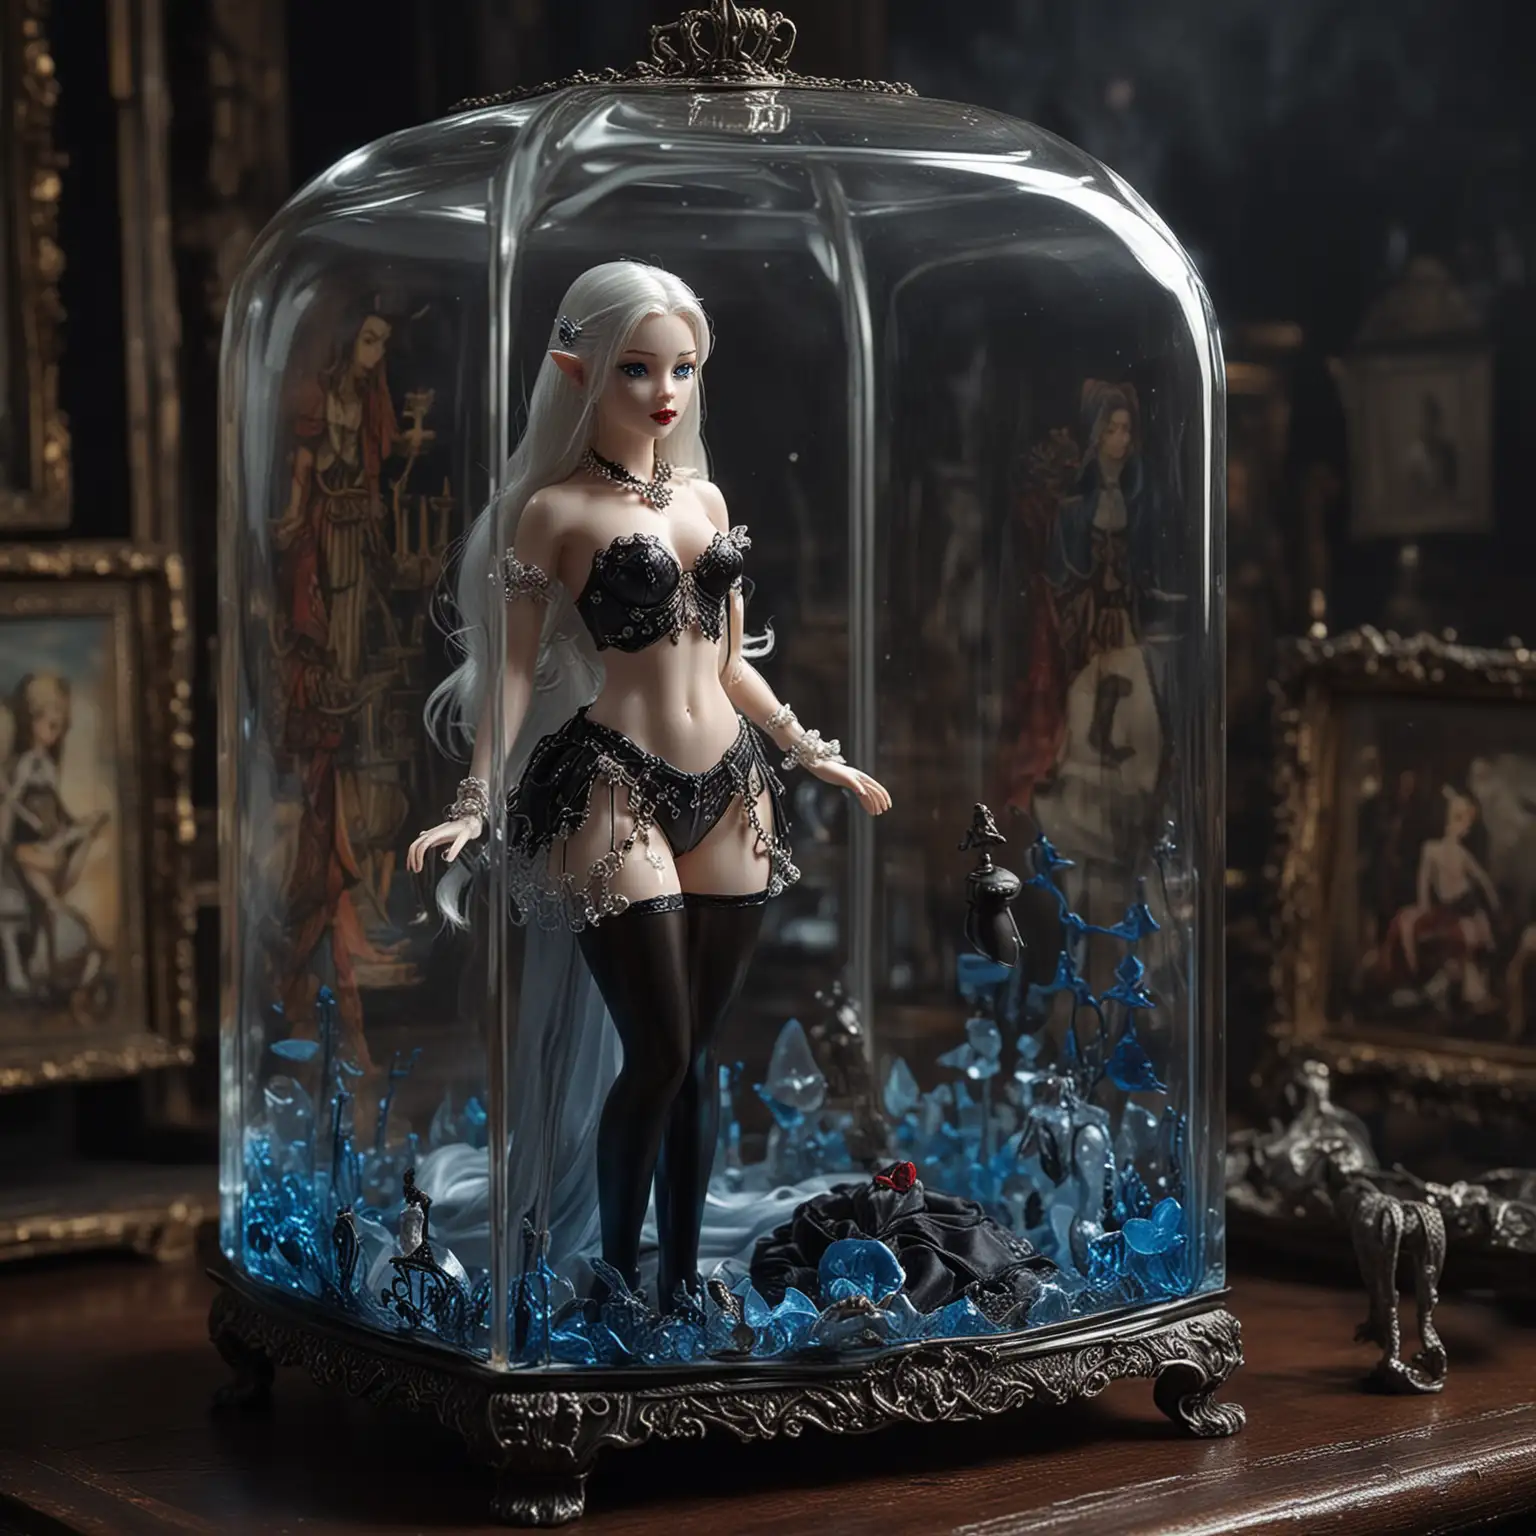 Subject:  (((miniature glowing glass box))), 1 small princess encased inside, glamorous body, long white hair, porcelain skin, blue eyes, elf ears, blue and black erotic lingerie, air, high detail, medium breasts, full body, standing, tiara, collar, earrings, black stockings, high heels
Background/Setting: The scene is an alchemist's lab, with the ((( miniature glowing glass box))) on the table and the small princess inside.
Style/Coloring: The image is highly detailed, likely featuring intricate designs on the lingerie and elaborate backgrounds. The colors are predominantly blue and black, suggesting an ominous tone.
Action: The small princess is mesmerized facing a dark wizard. Her posture and expression convey resignation to her new fate .
Items/Costume: The small princess is wearing small blue and black erotic push-up bra and thong, with accessories such as earrings, a collar, a tiara, garter belt, stockings and high heels.  She  is wearing red lipstick and heavy make-up.  These details contribute to her royal and seductive appearance.  Her hair is up suggesting a refined royal appearance.